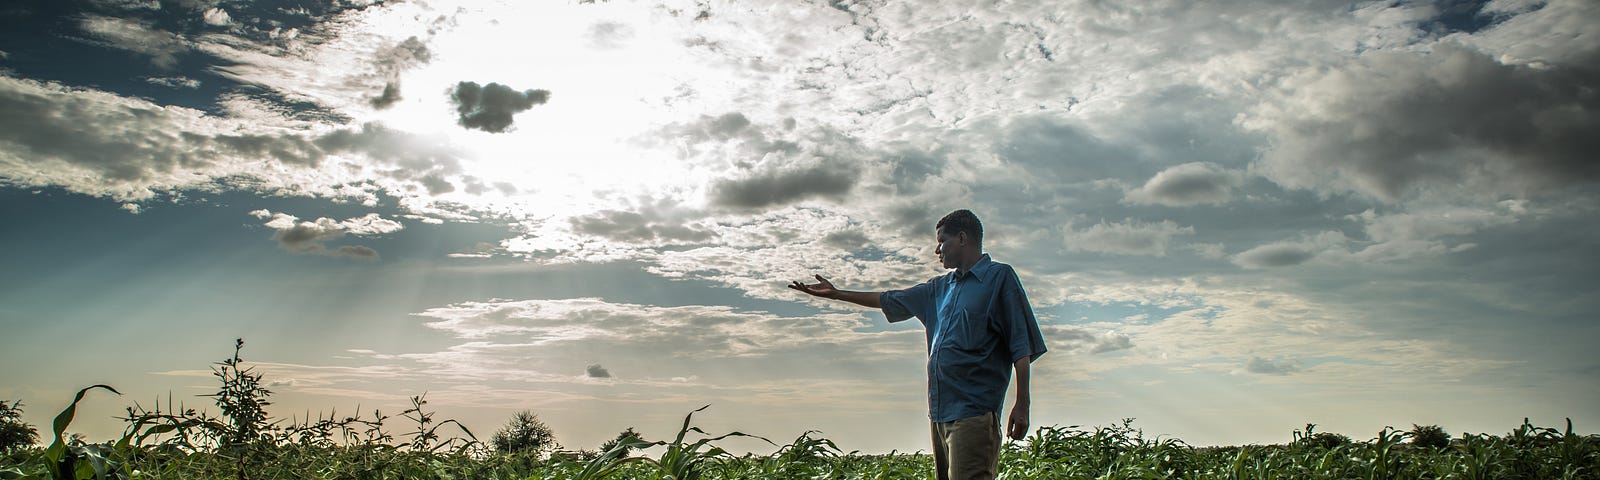 A man gestures while in field with depleted soil and hip-high plants.